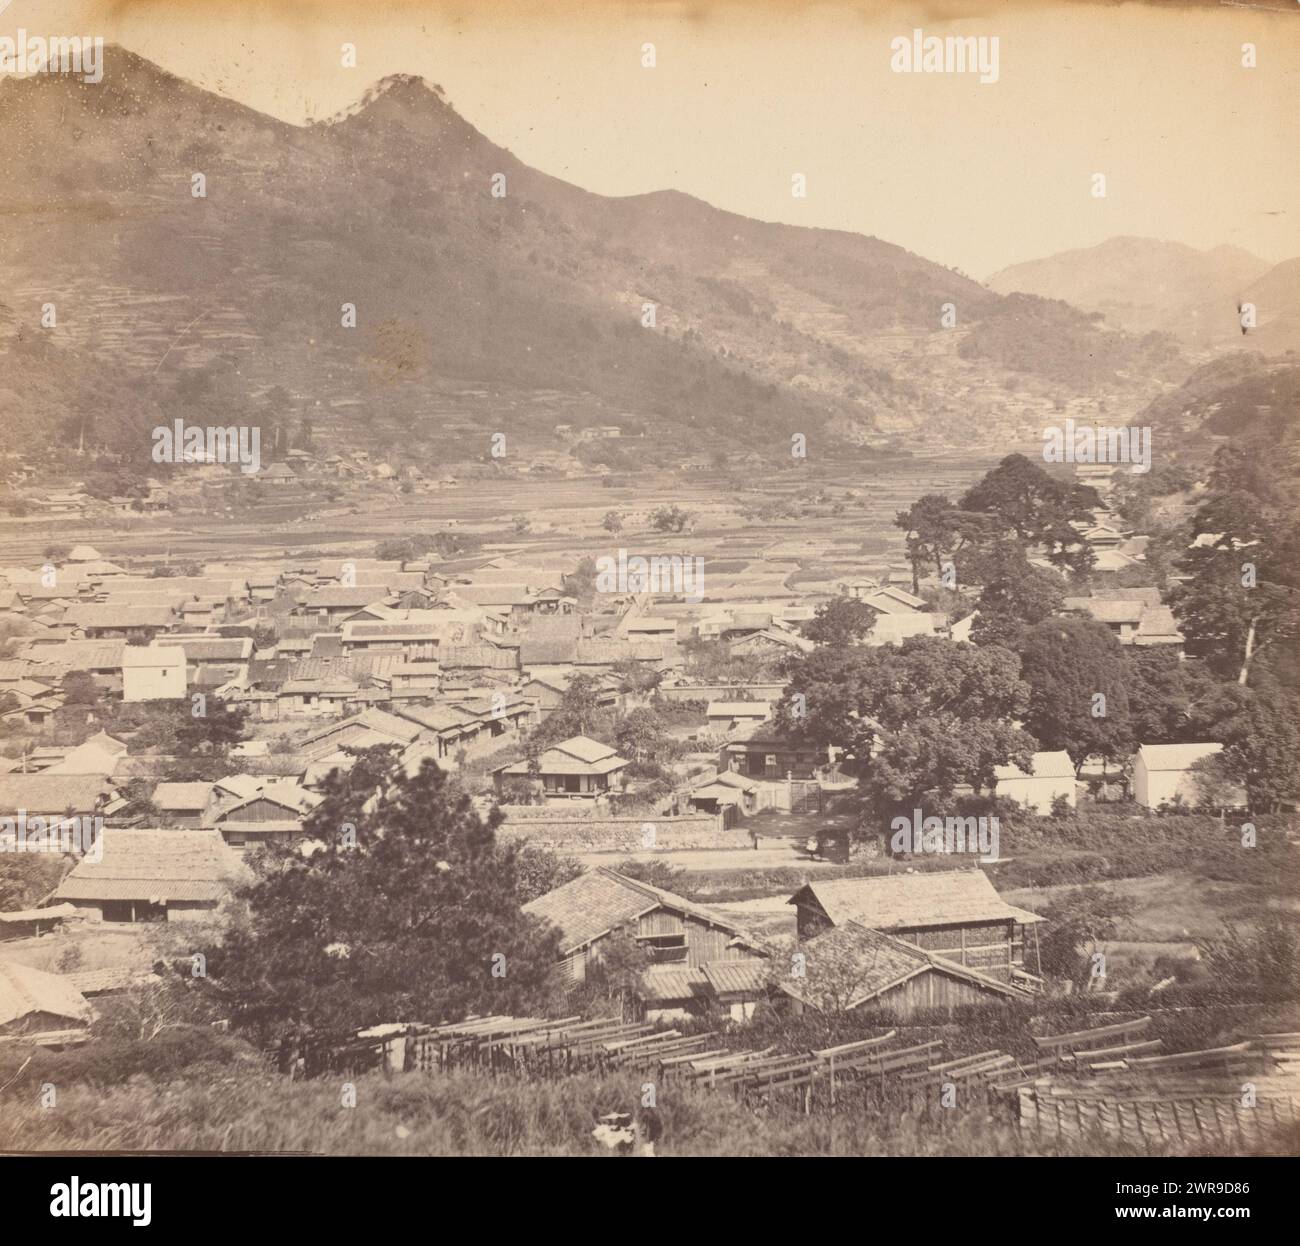 Village in Japan, Antoon Bauduin, (attributed to), Japan, 1862 - 1866, paper, albumen print, height 185 mm × width 197 mm, height 175 mm × width 197 mm, photograph Stock Photo